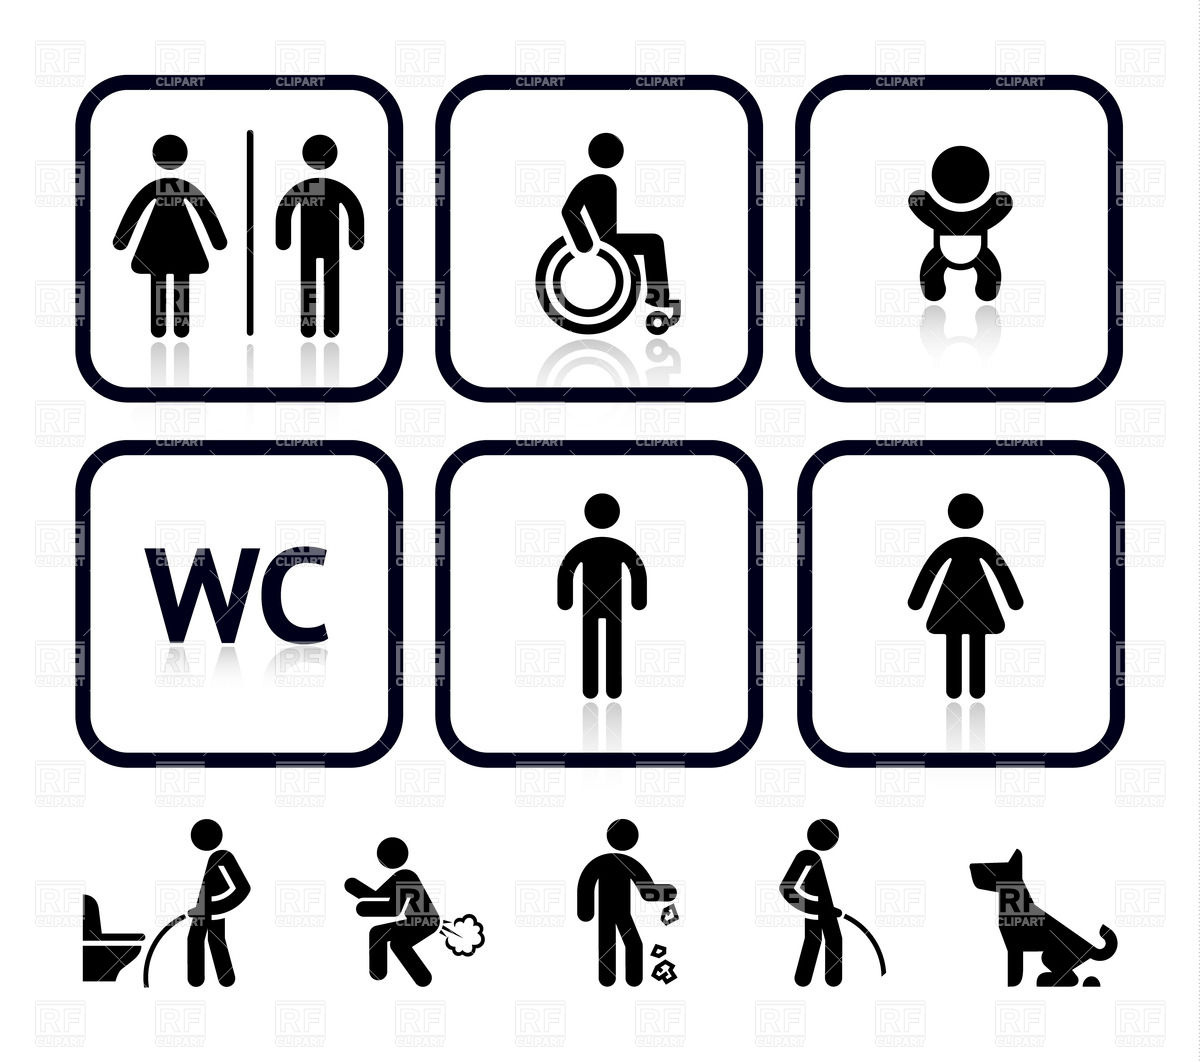       Funny Wc Signs 33110 Download Royalty Free Vector Clipart  Eps